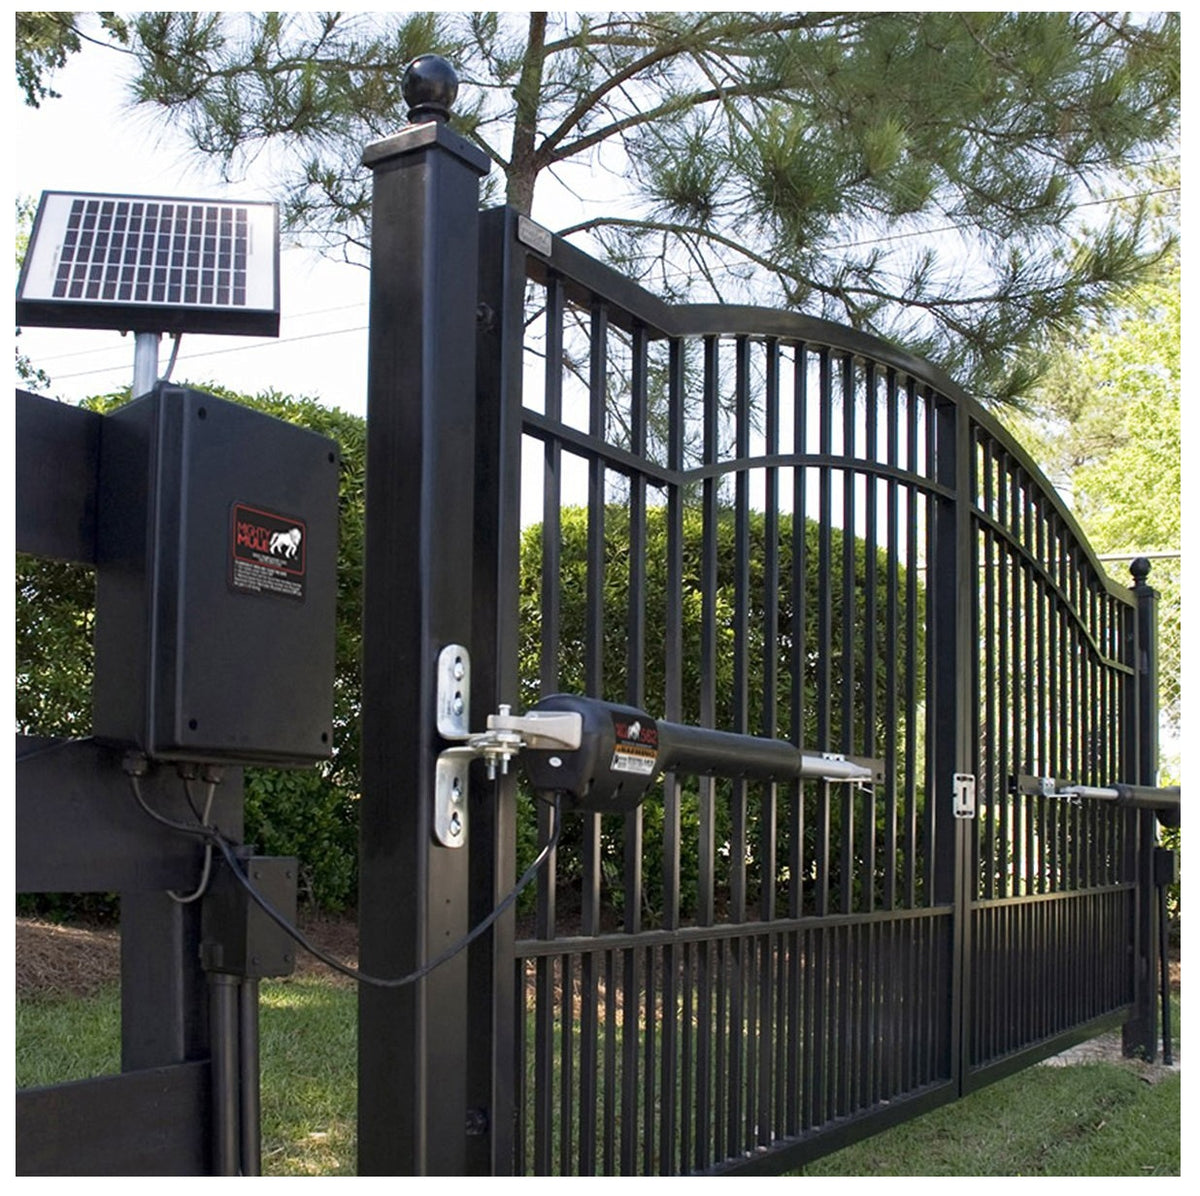 buy gate openers & keypads at cheap rate in bulk. wholesale & retail garden edging & fencing store.